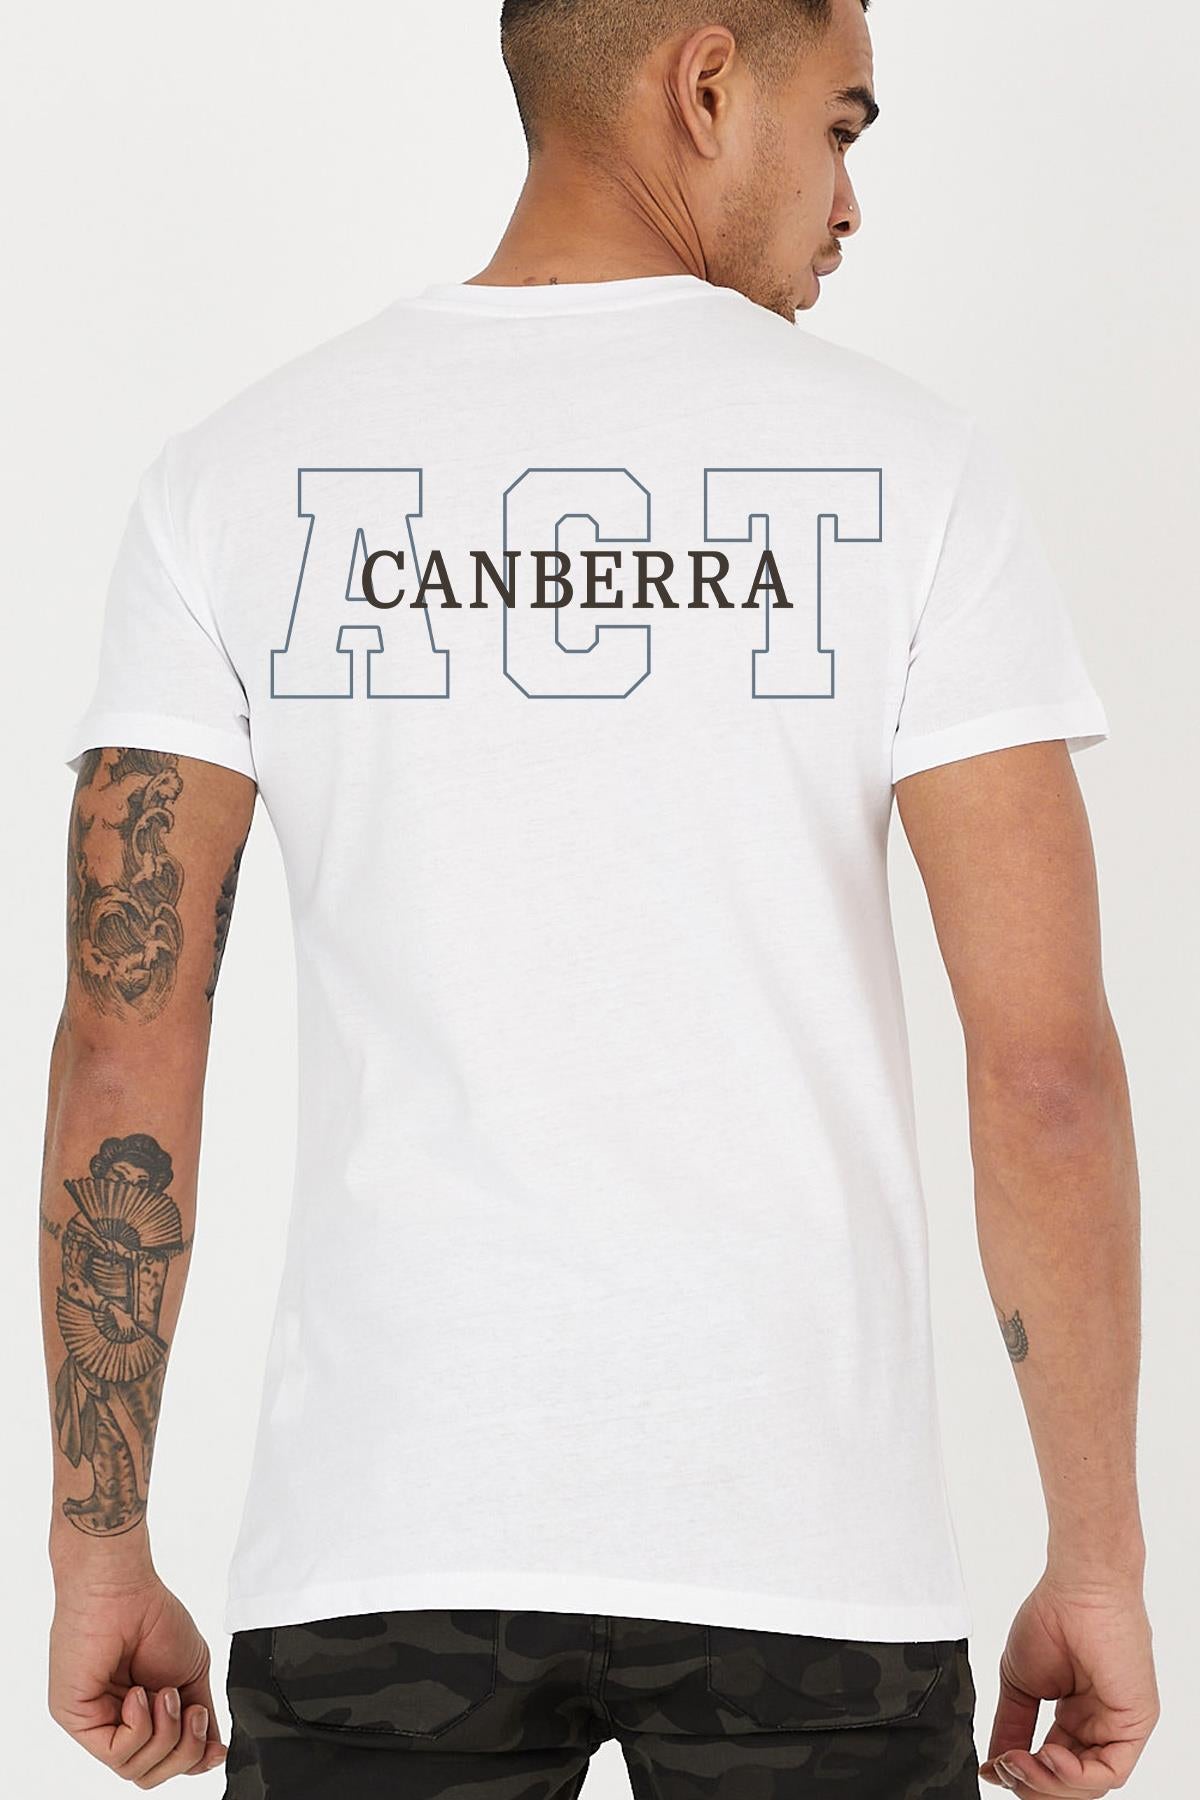 Canberra Back printed Crew Neck relaxed men